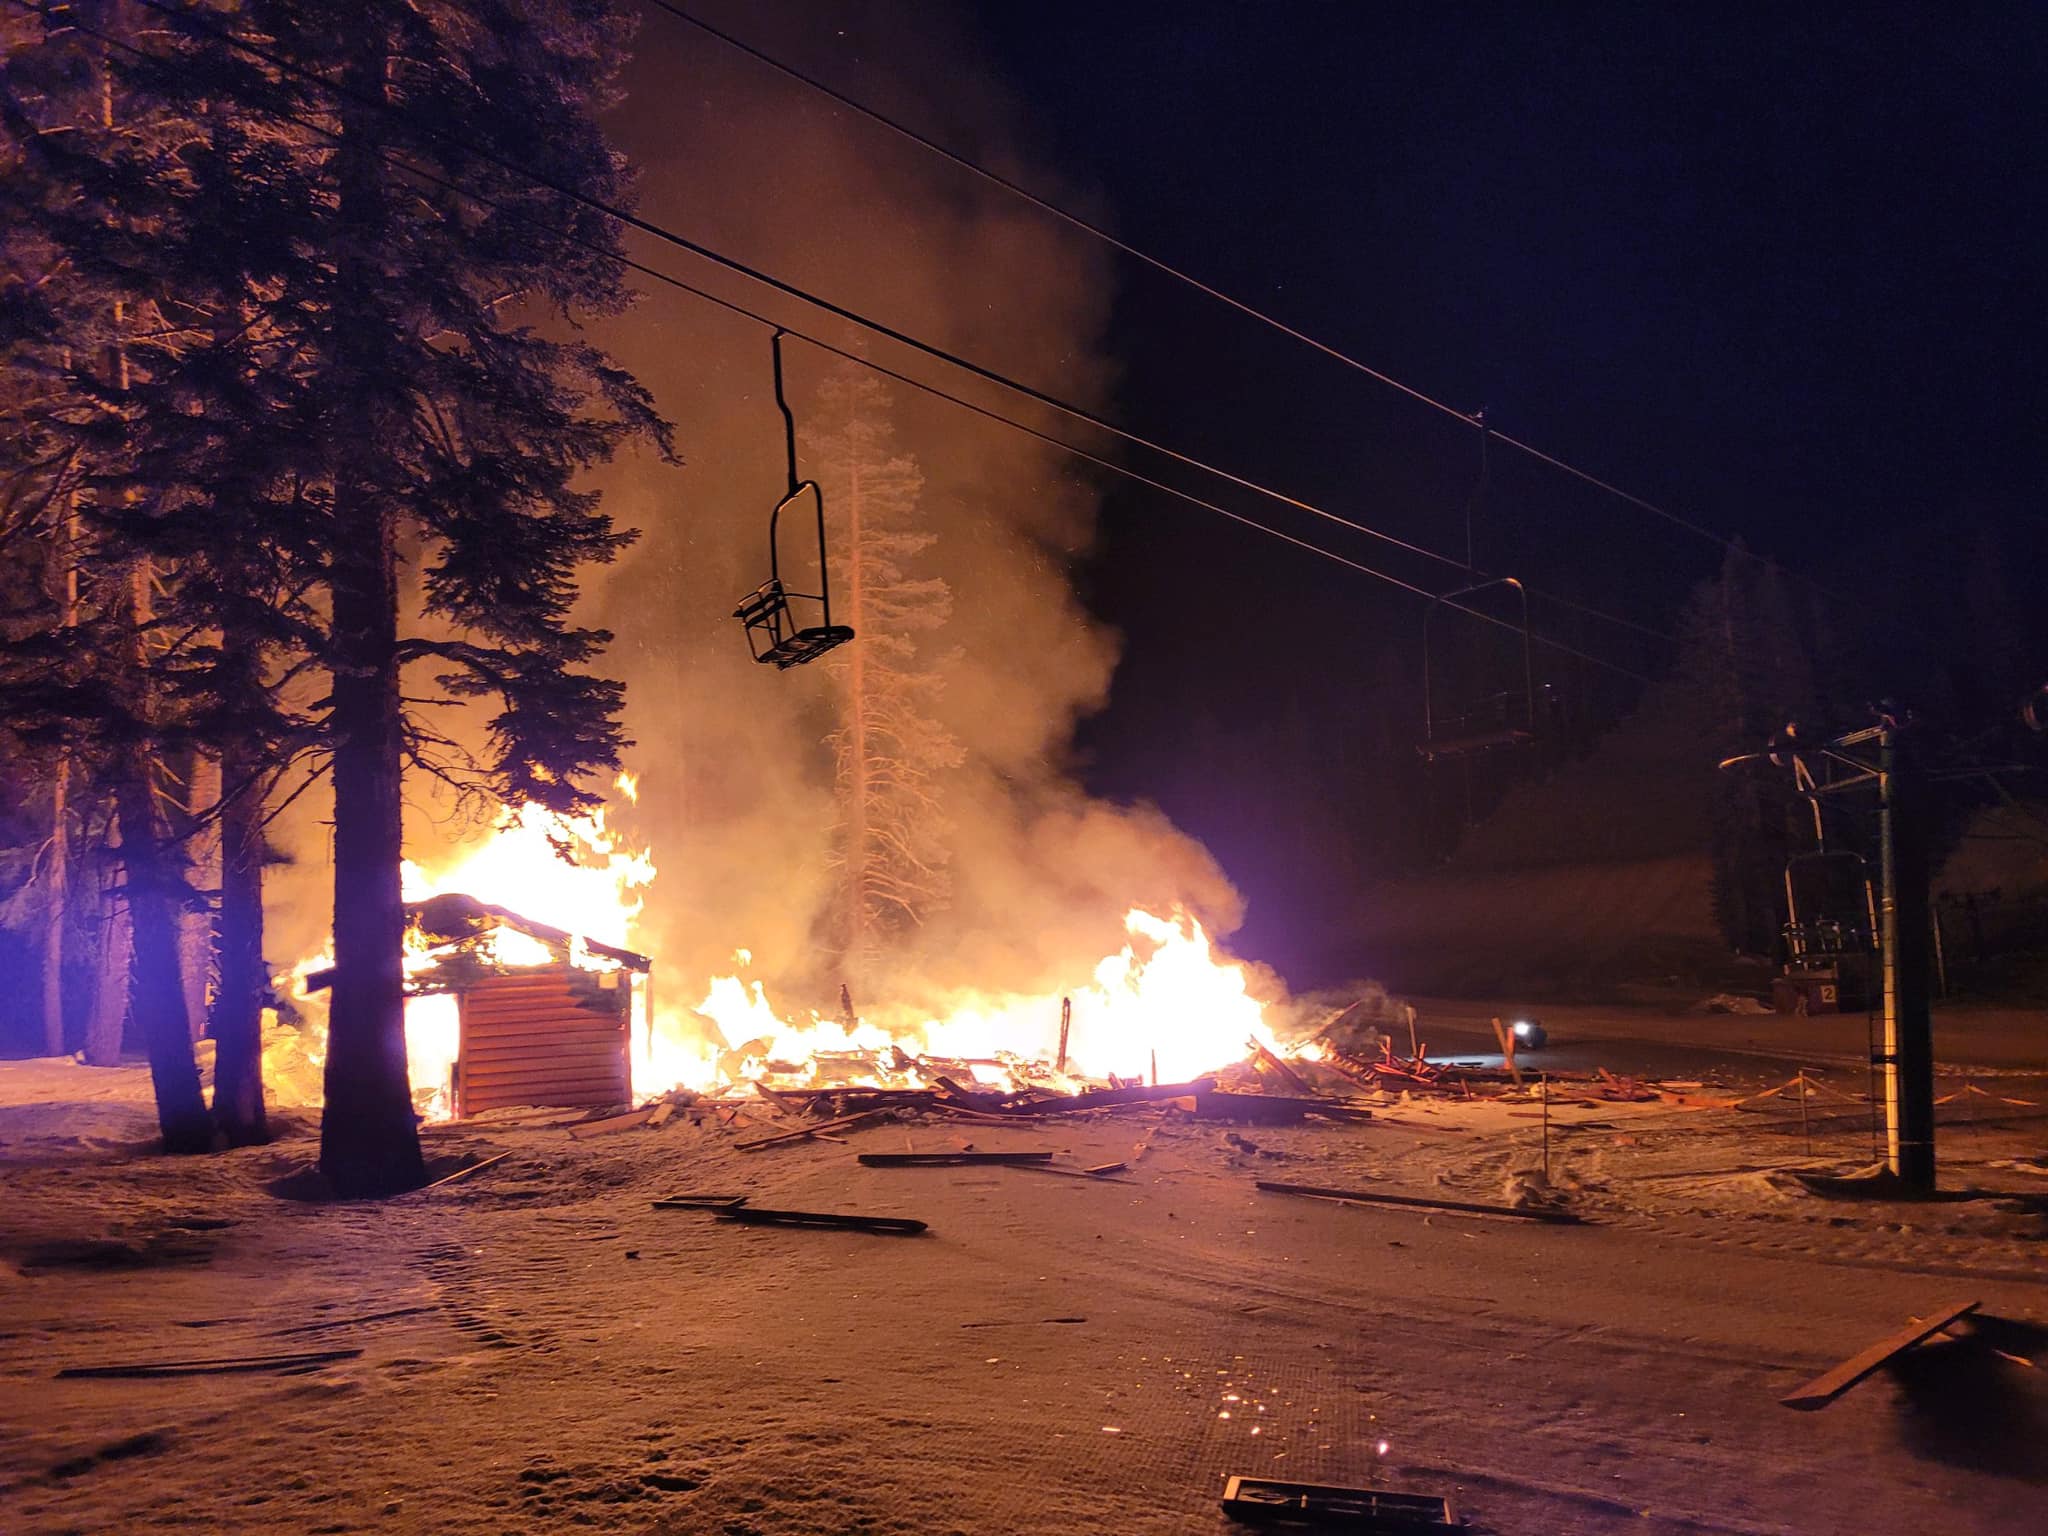 Donner Ski Ranch Lodge Destroyed In Structure Fire